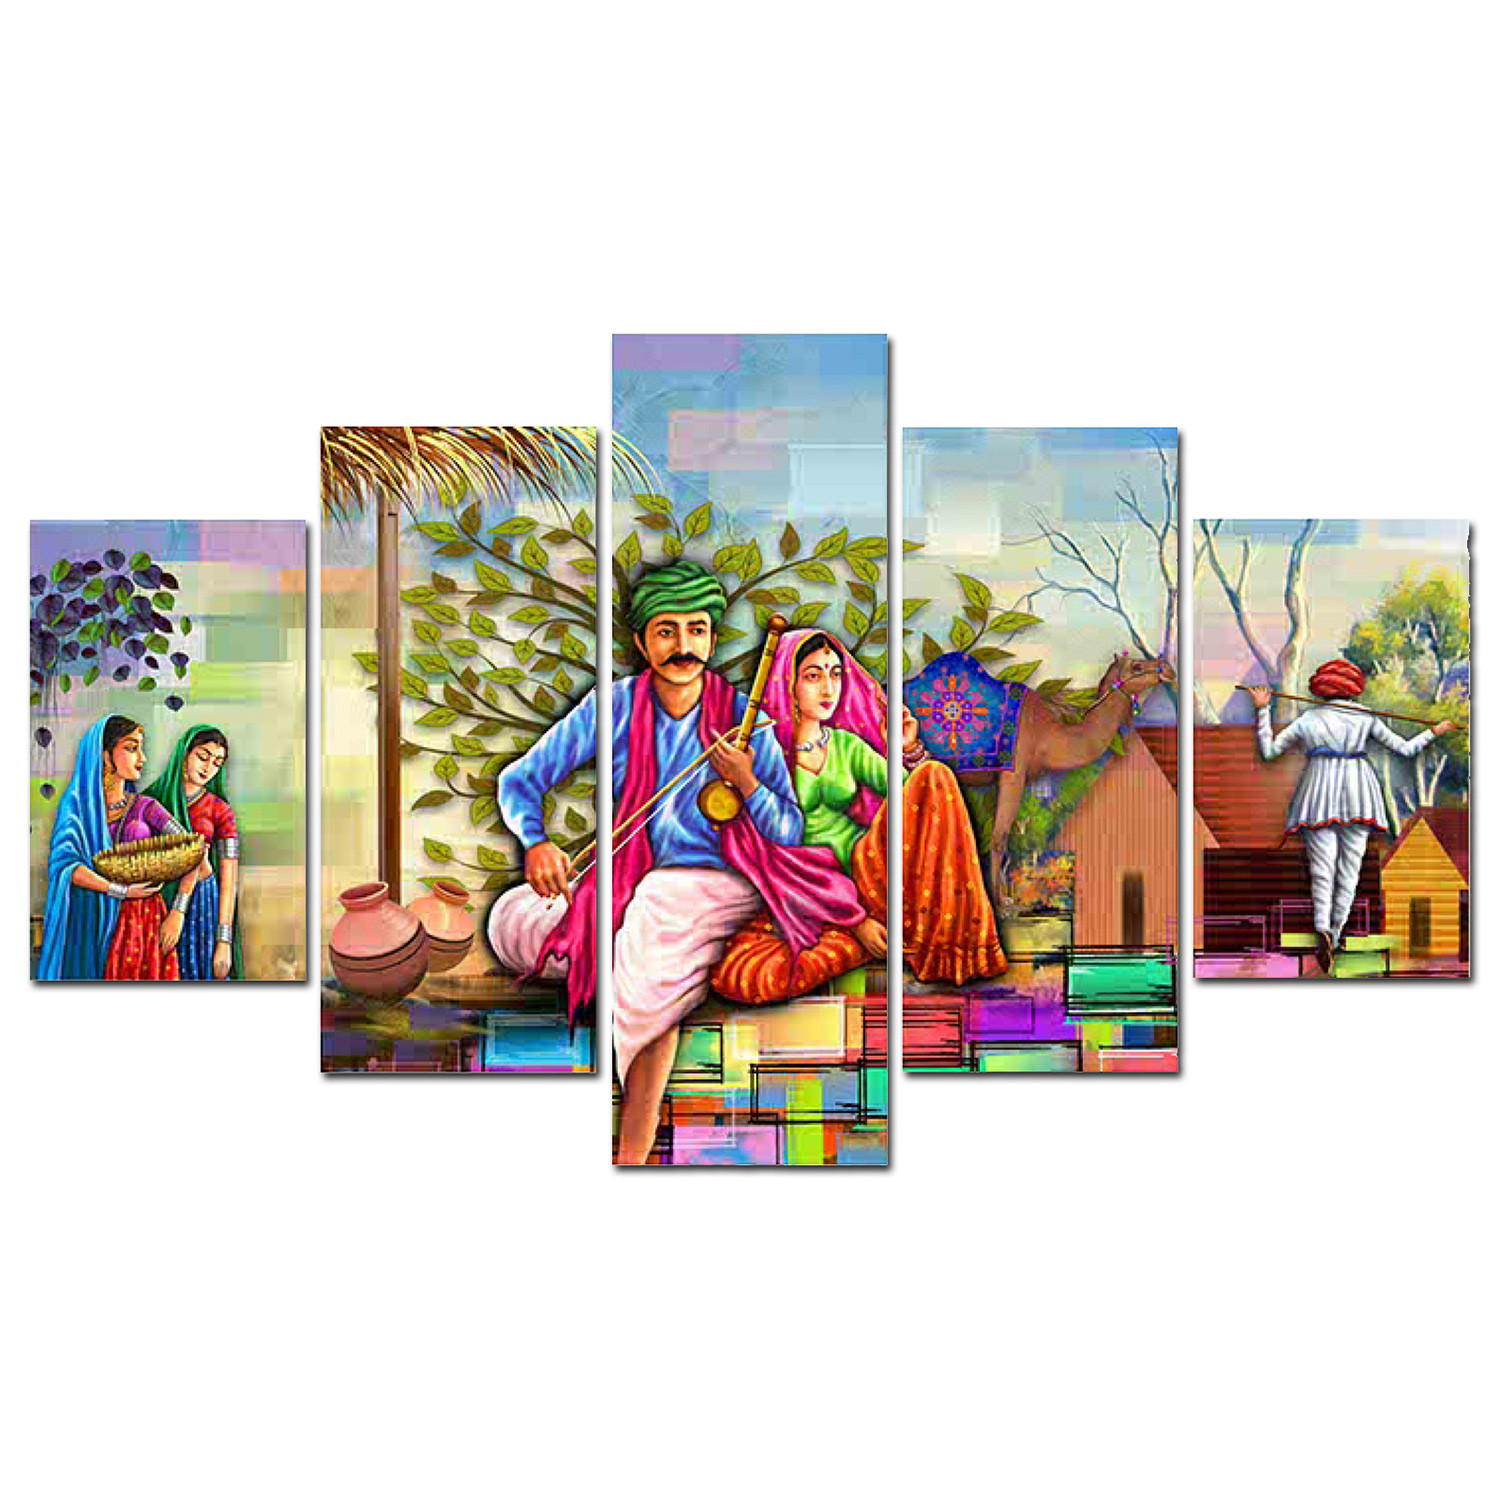 Kuber Industries Wall Paintings | MDF Wooden Wall Art for Living Room |Wall Sculpture | Rajasthani Painting for Bedroom | Office | Hotels | Gift | 1730KITL3 |5 Piece Set| Multicolor